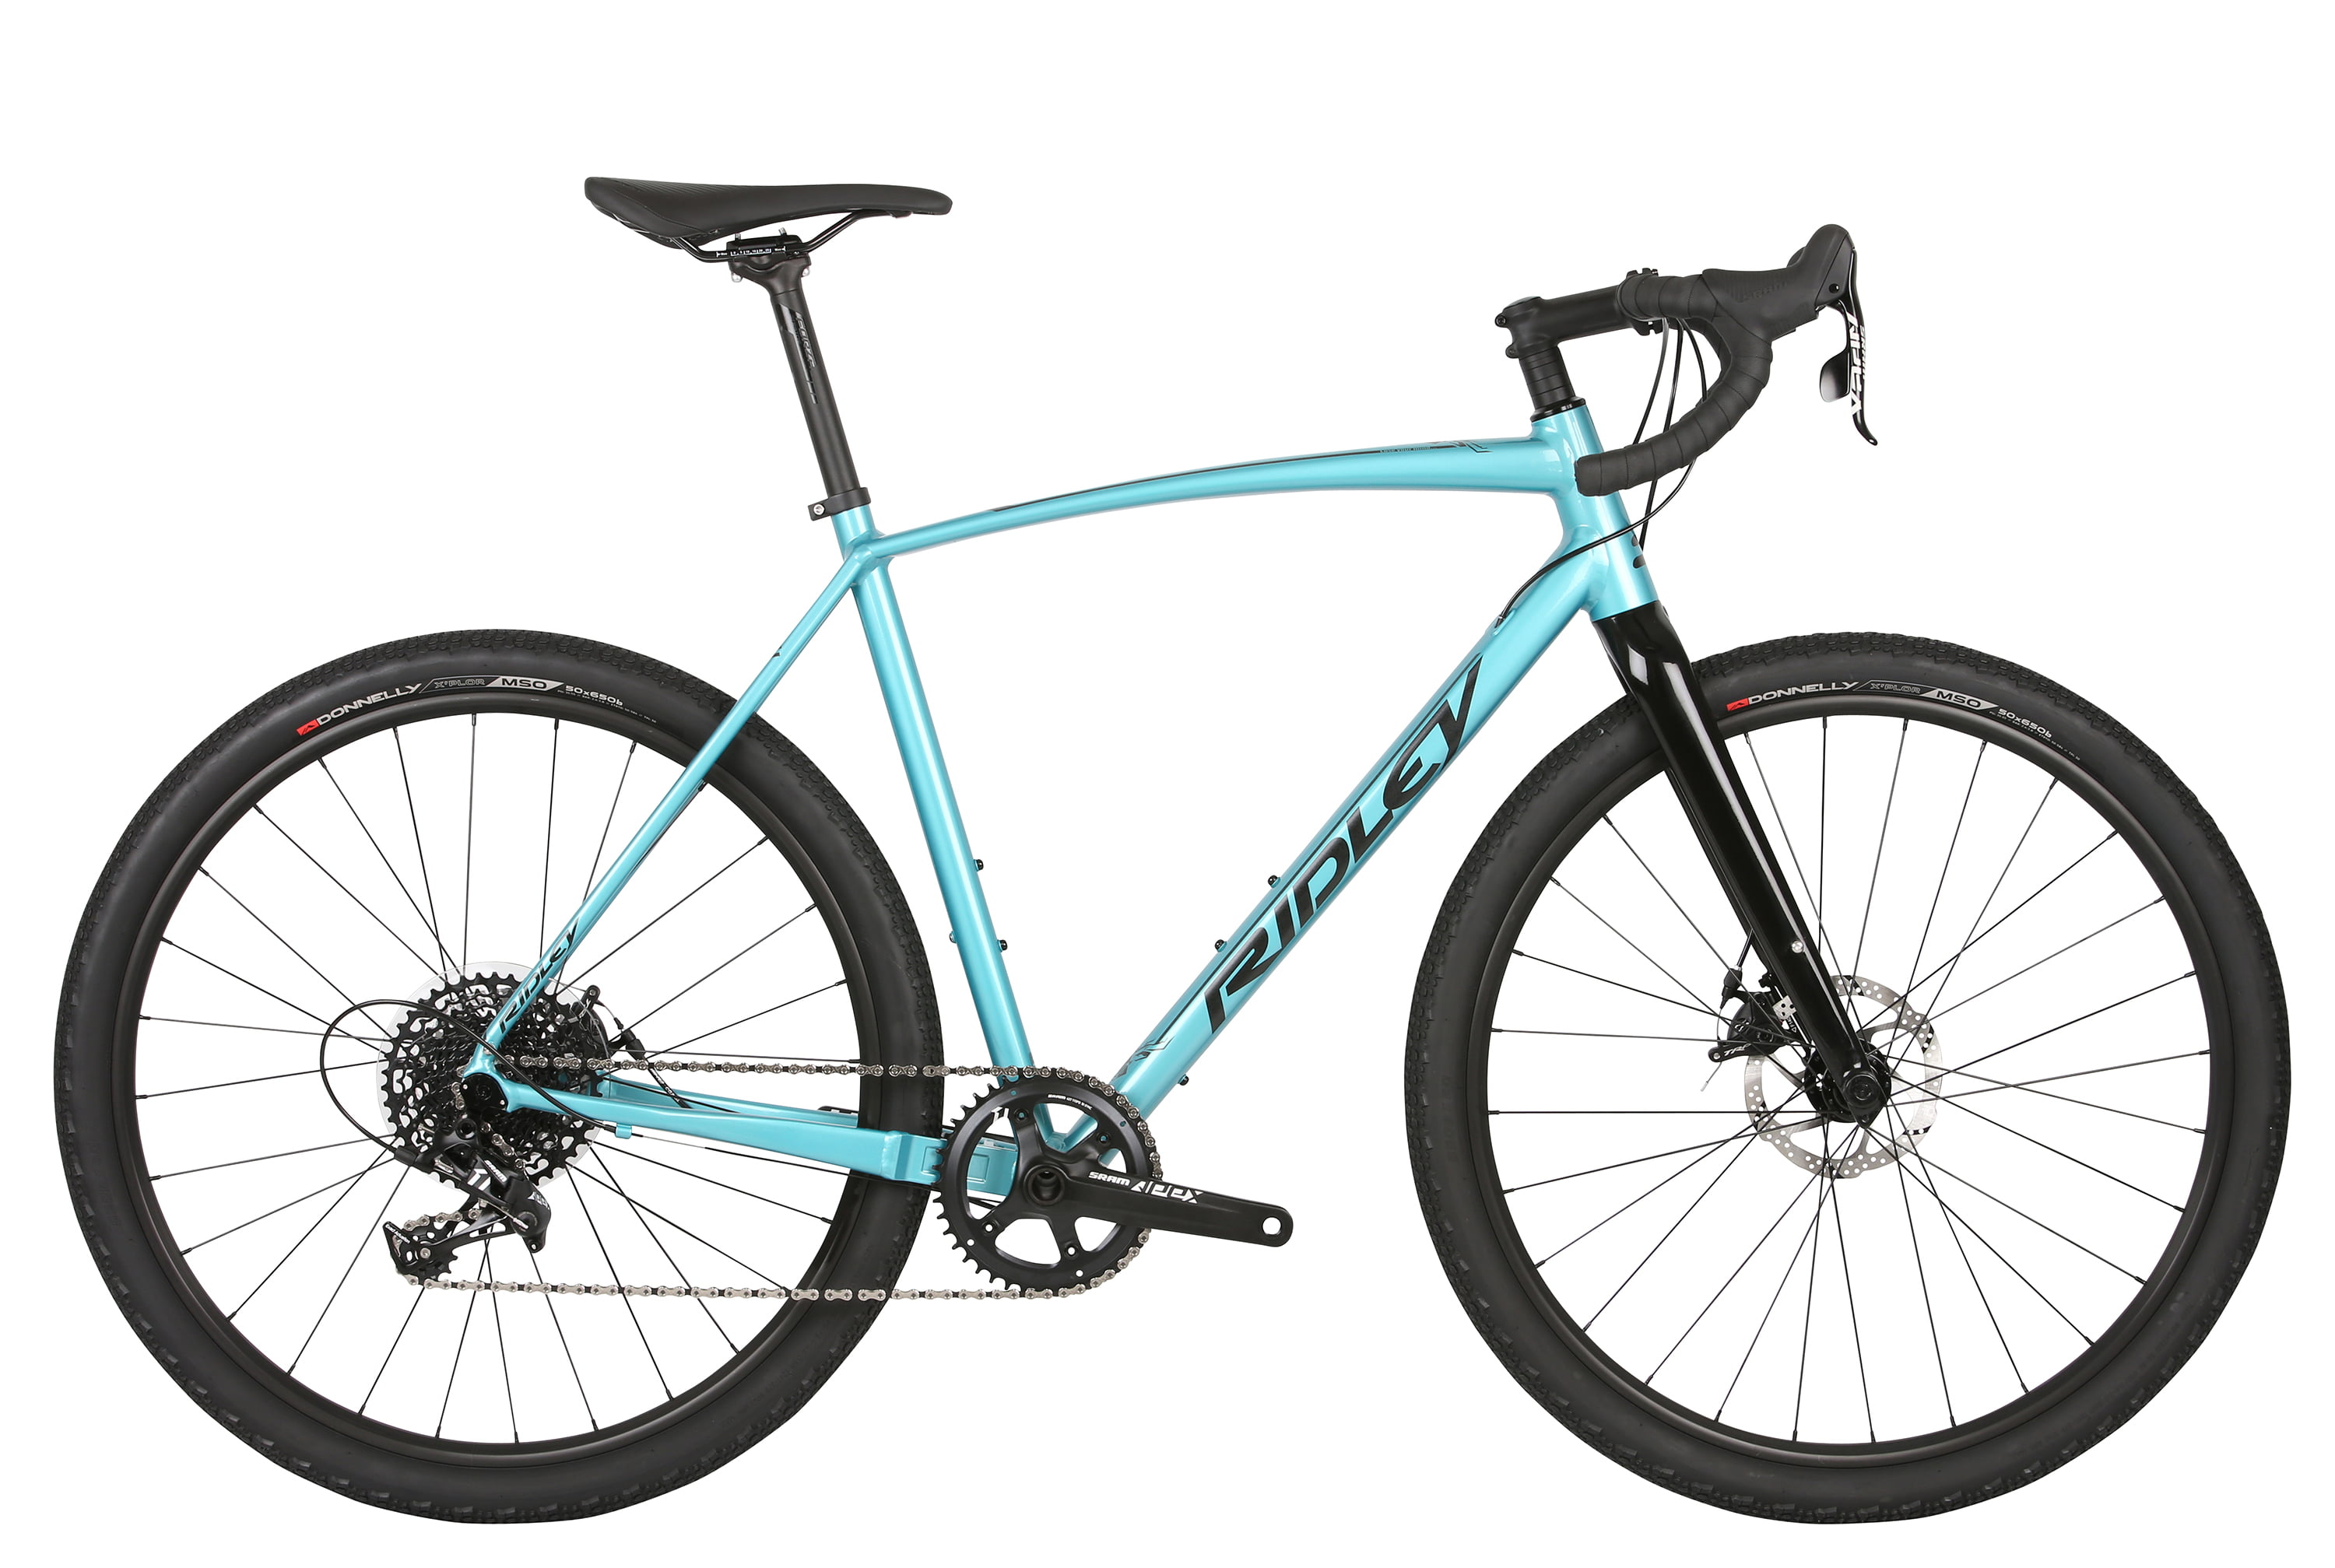 Ridley X-Trail Gravel Bicycle - Alloy Frame with 650b Wheels and SRAM Apex 1 Groupset / Size M, Turquoise